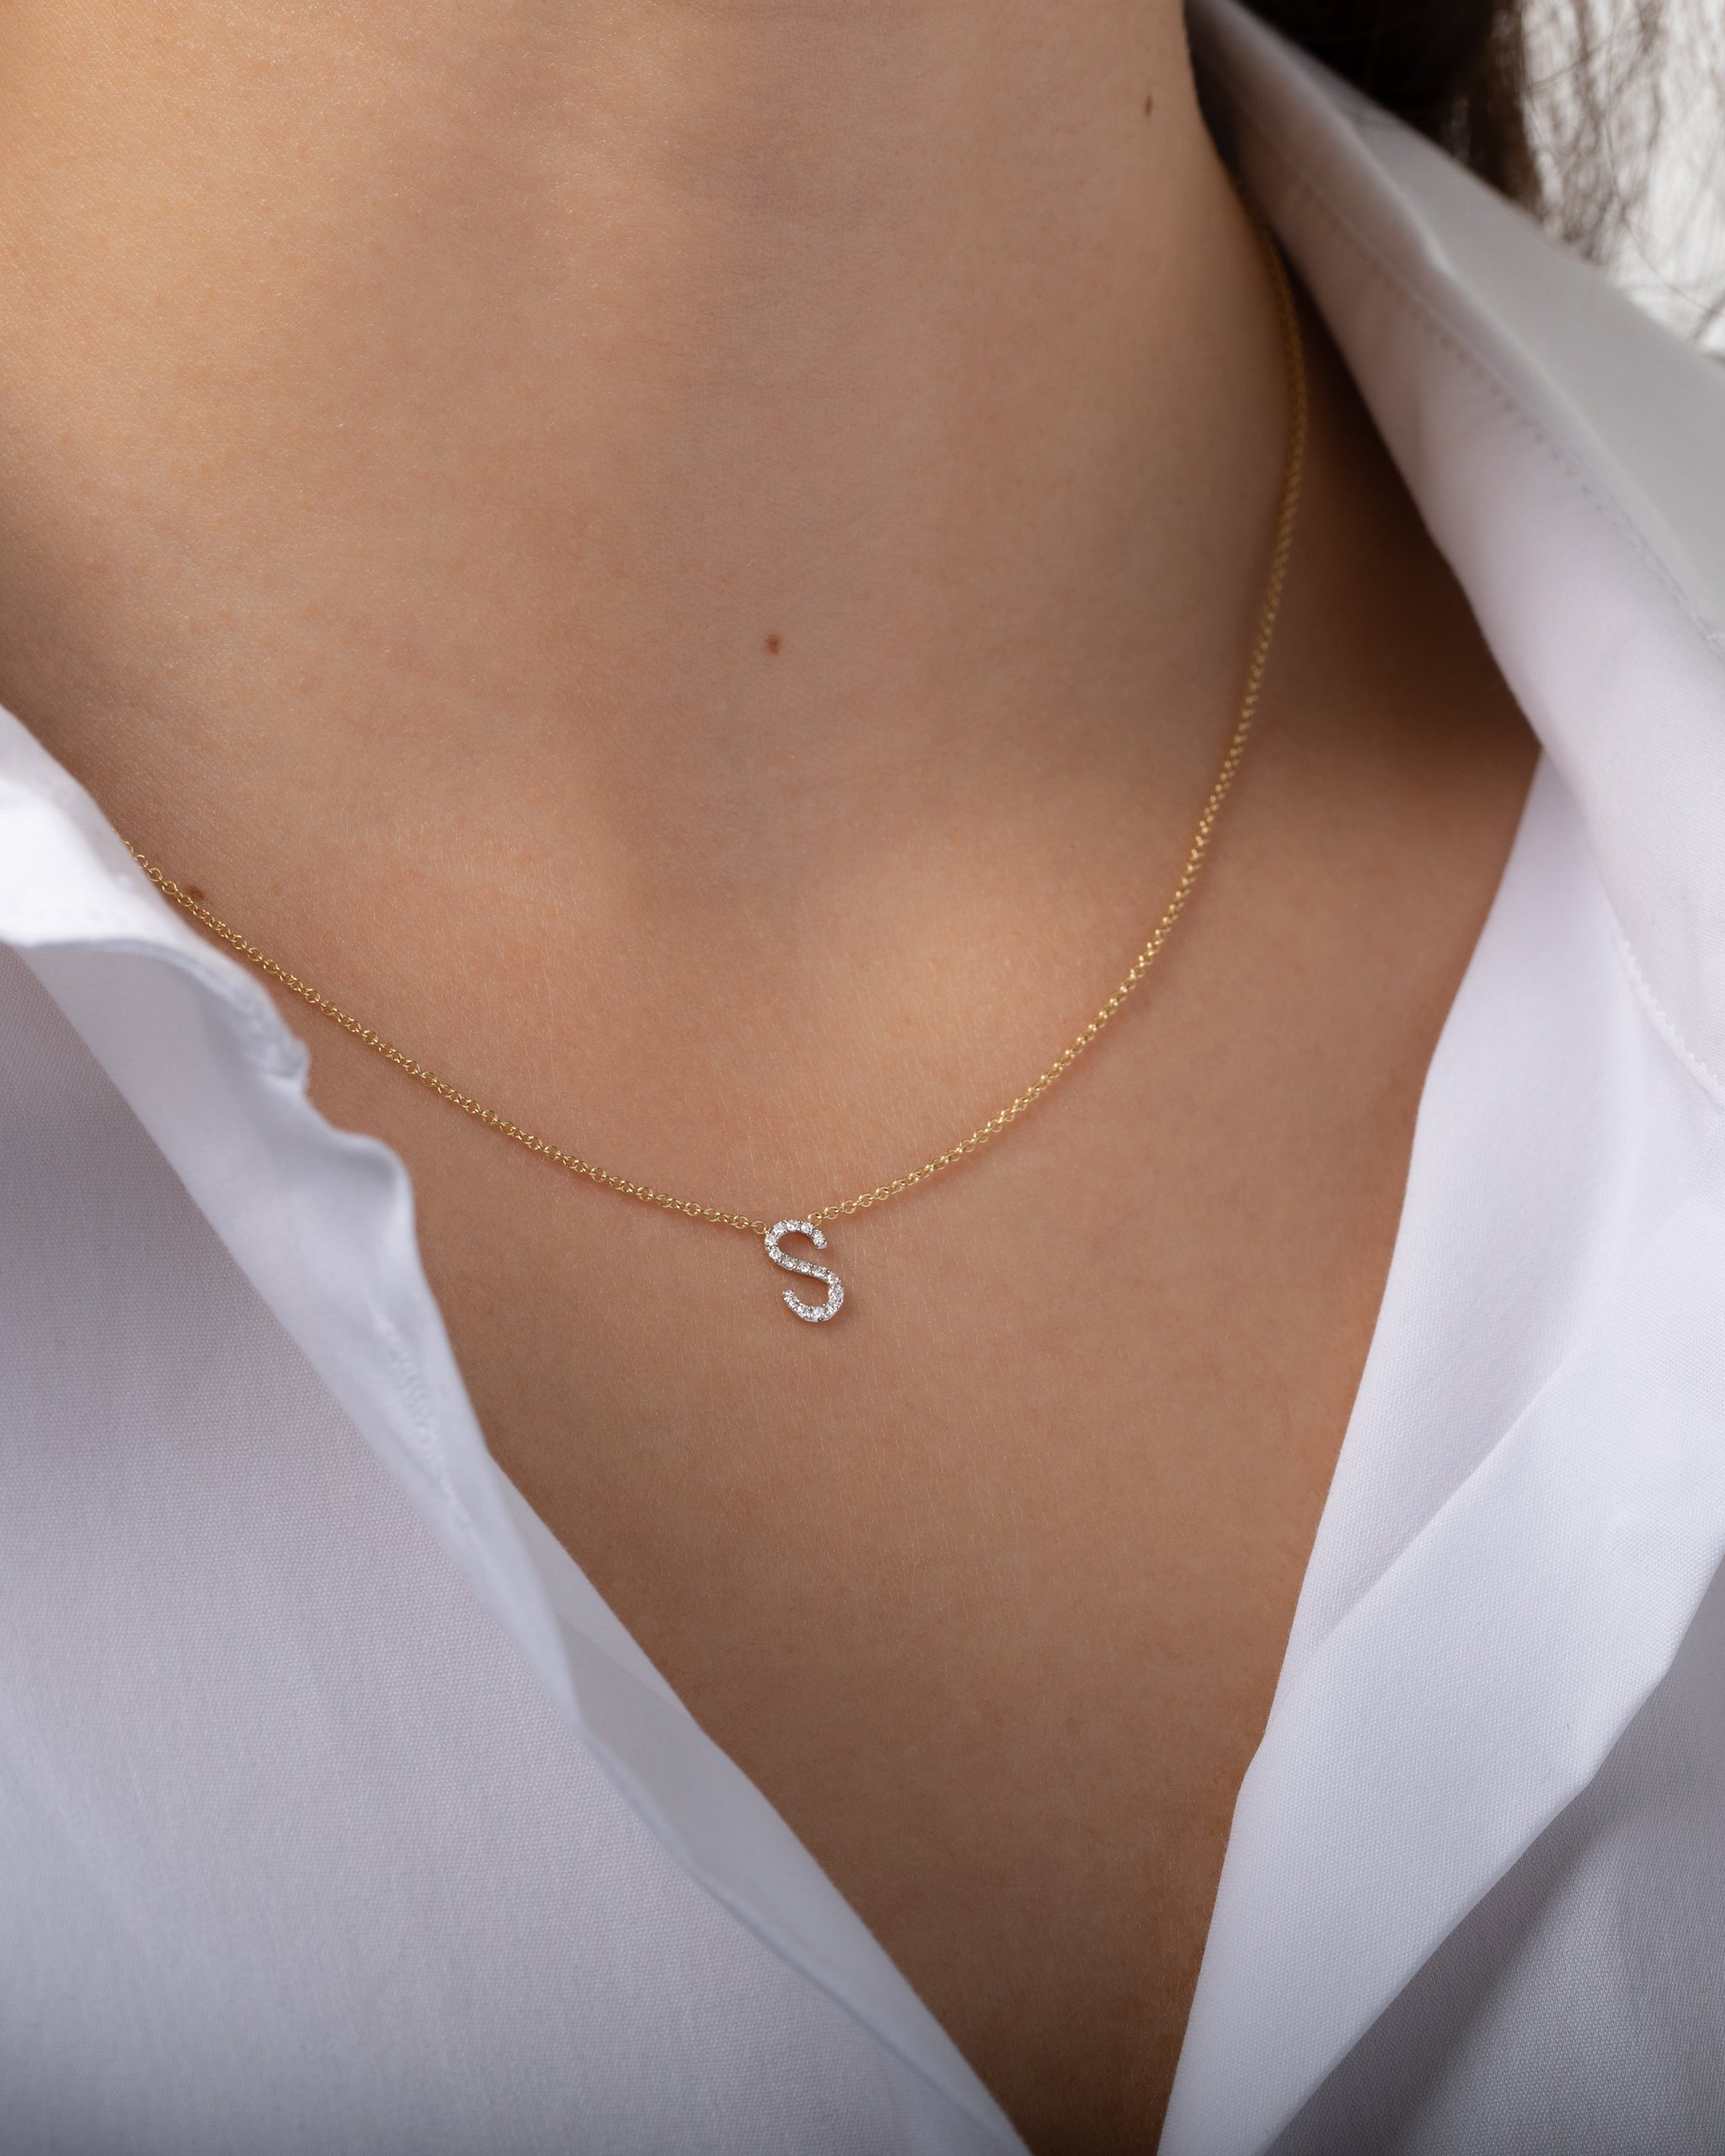 14K YELLOW GOLD DIAMOND INITIAL NECKLACE, DIAMOND LETTER NECKLACE, LETTER A  | eBay